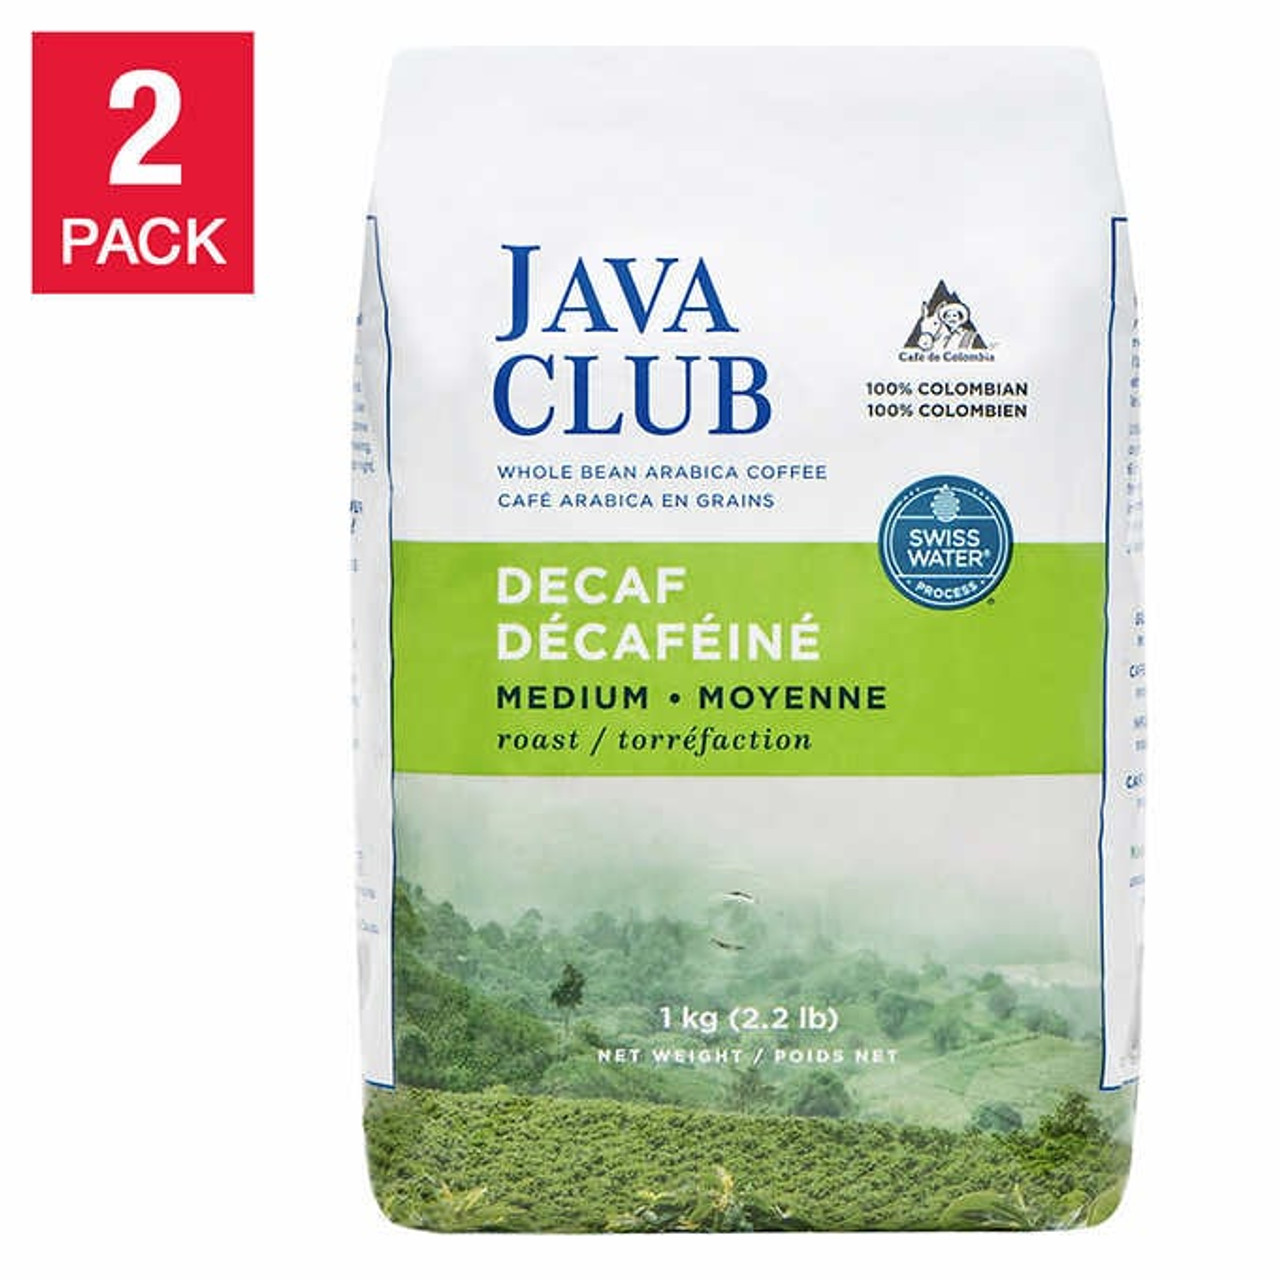 Java Club 100% Colombian Whole Bean Decaf Arabica Coffee - 2 x 1 kg - Decaffeinated Delight from Colombia- Chicken Pieces